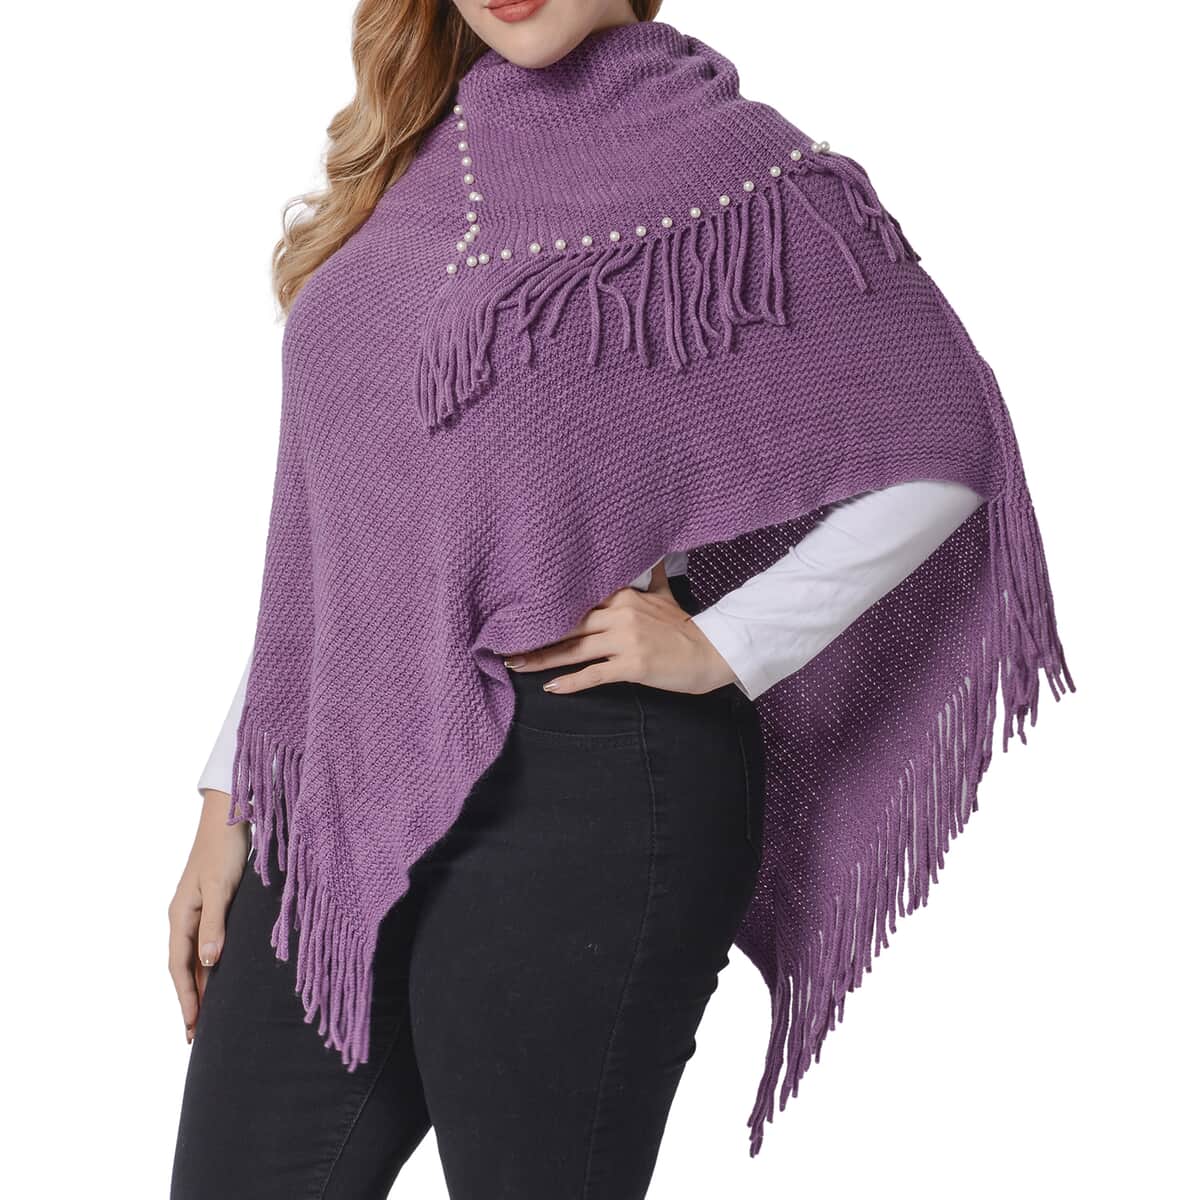 Mauve Cape Neck V-Shape Poncho with Pearls and Fringe Accent (One Size Fits Most, 100% Acrylic) image number 2